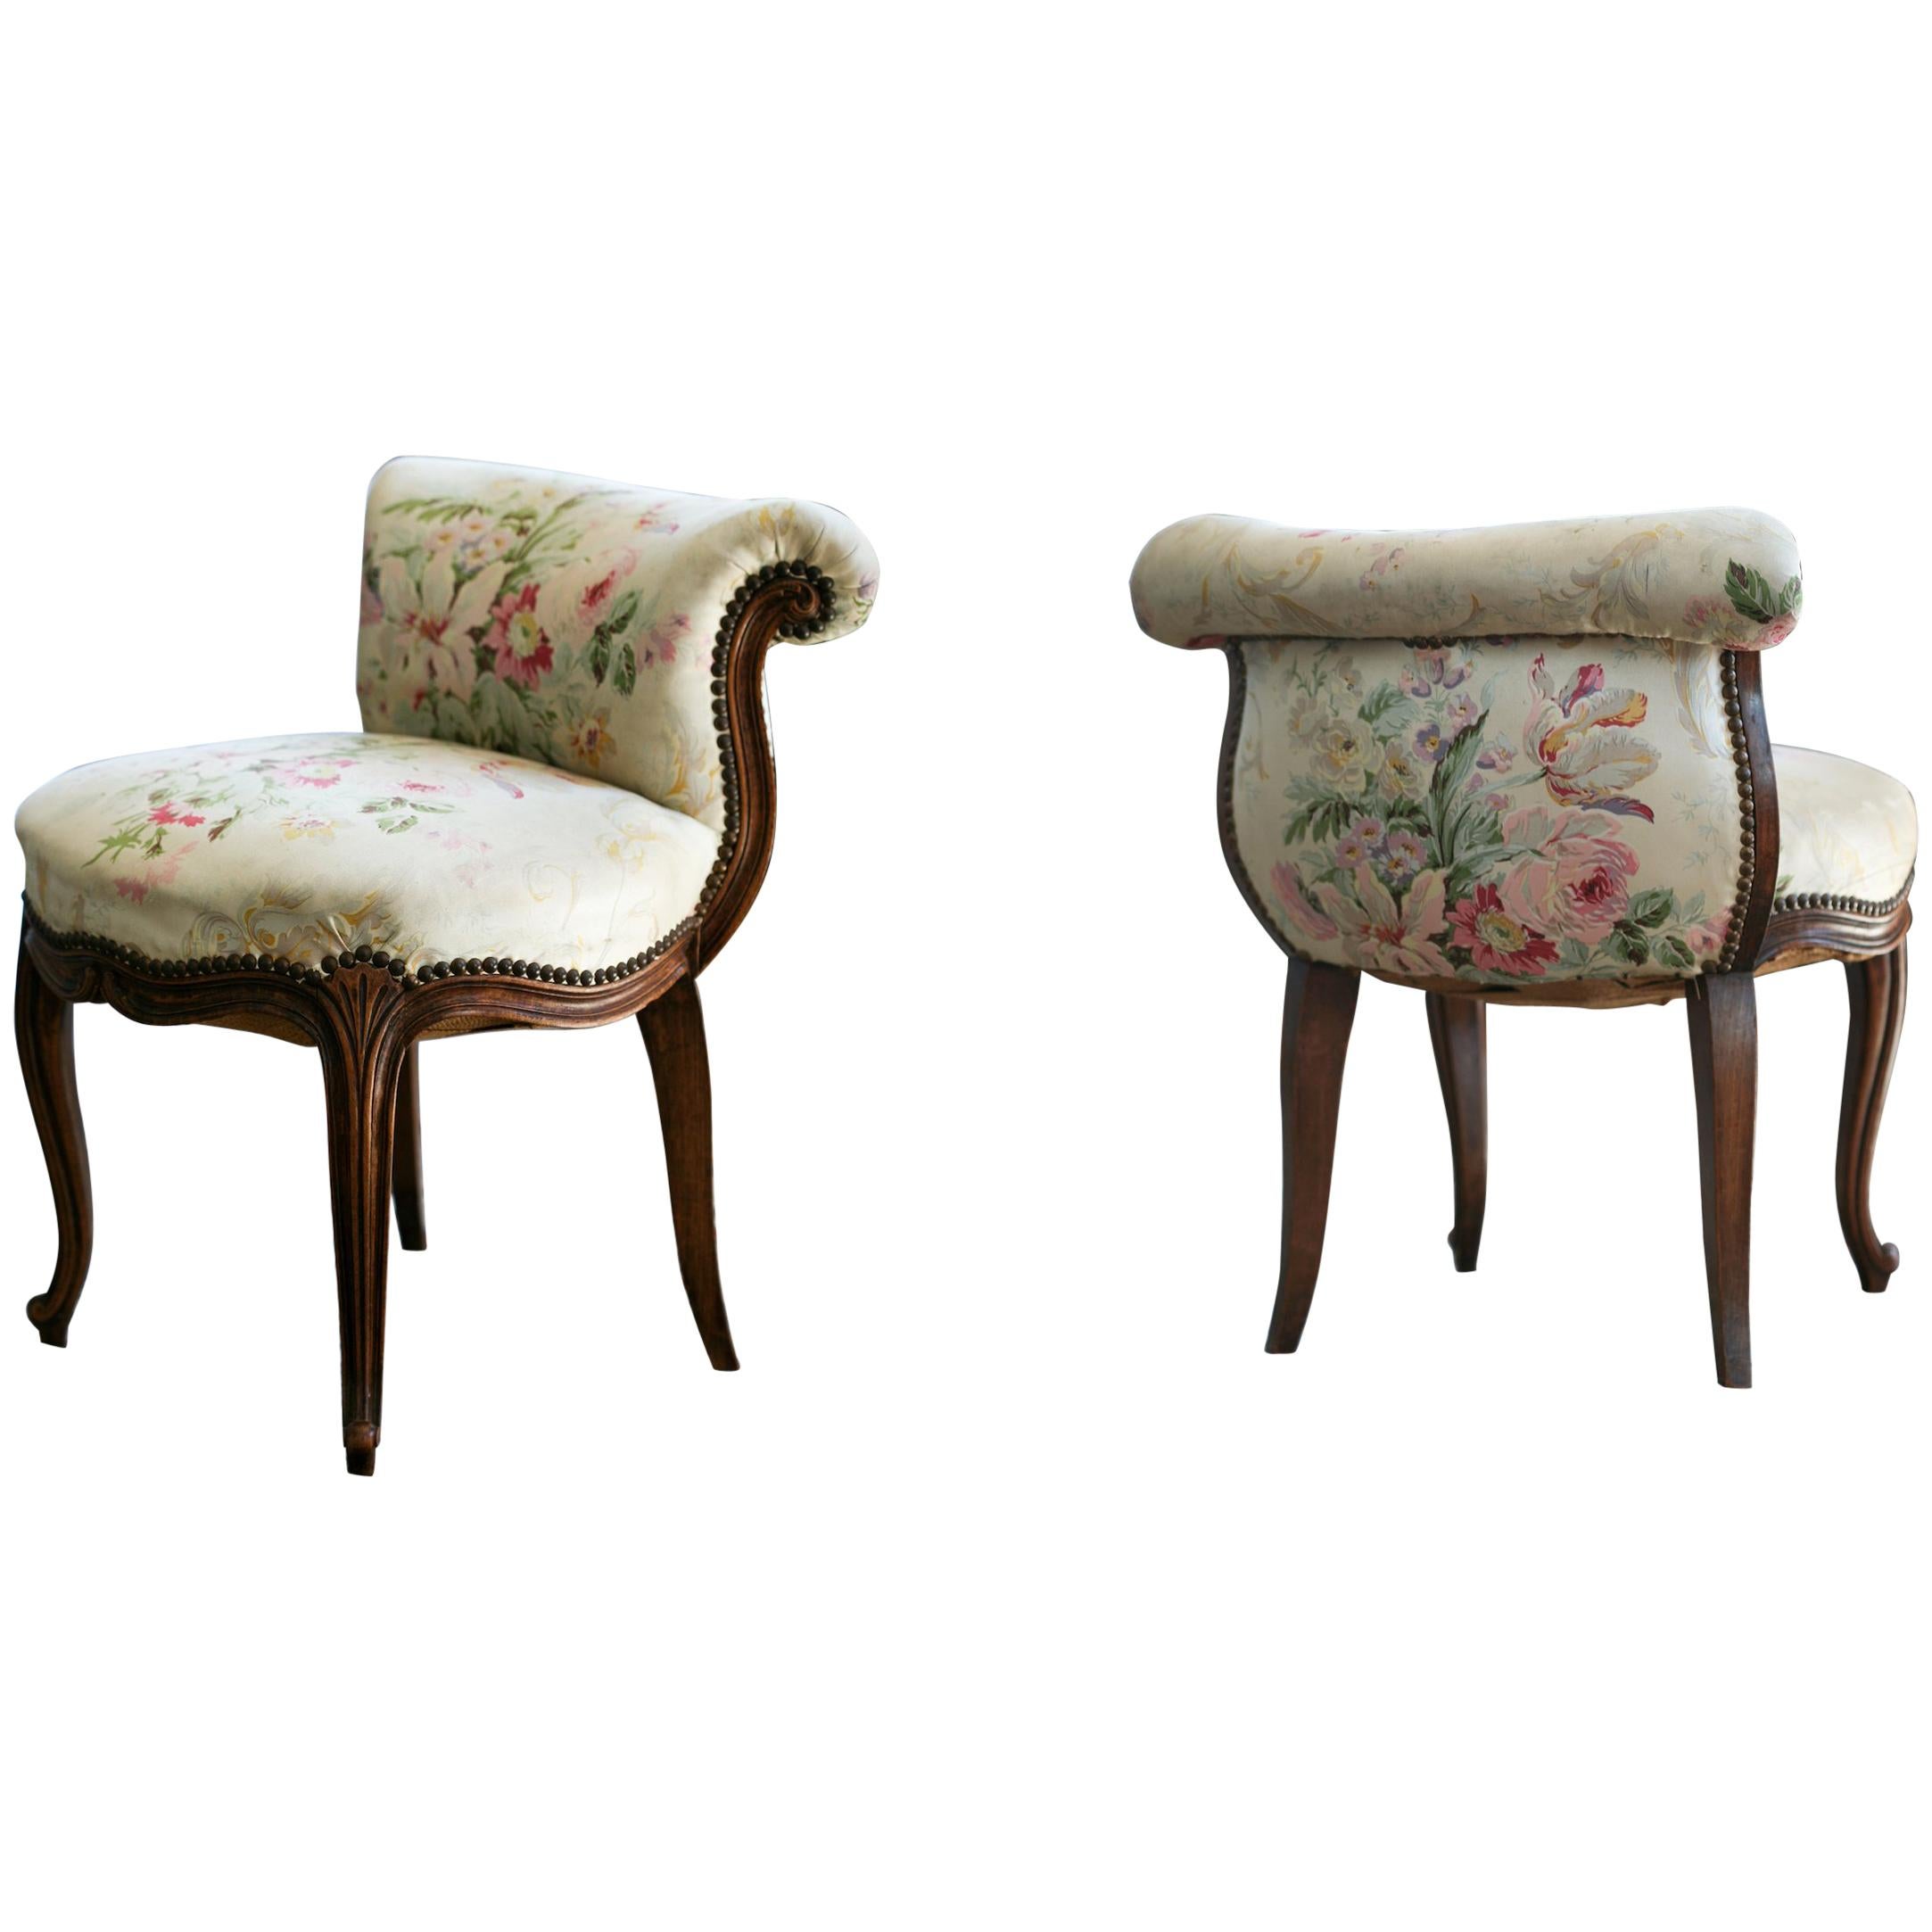 19th Century Pair of Hand-Carved Walnut Ladies Chairs in Louis XV Style